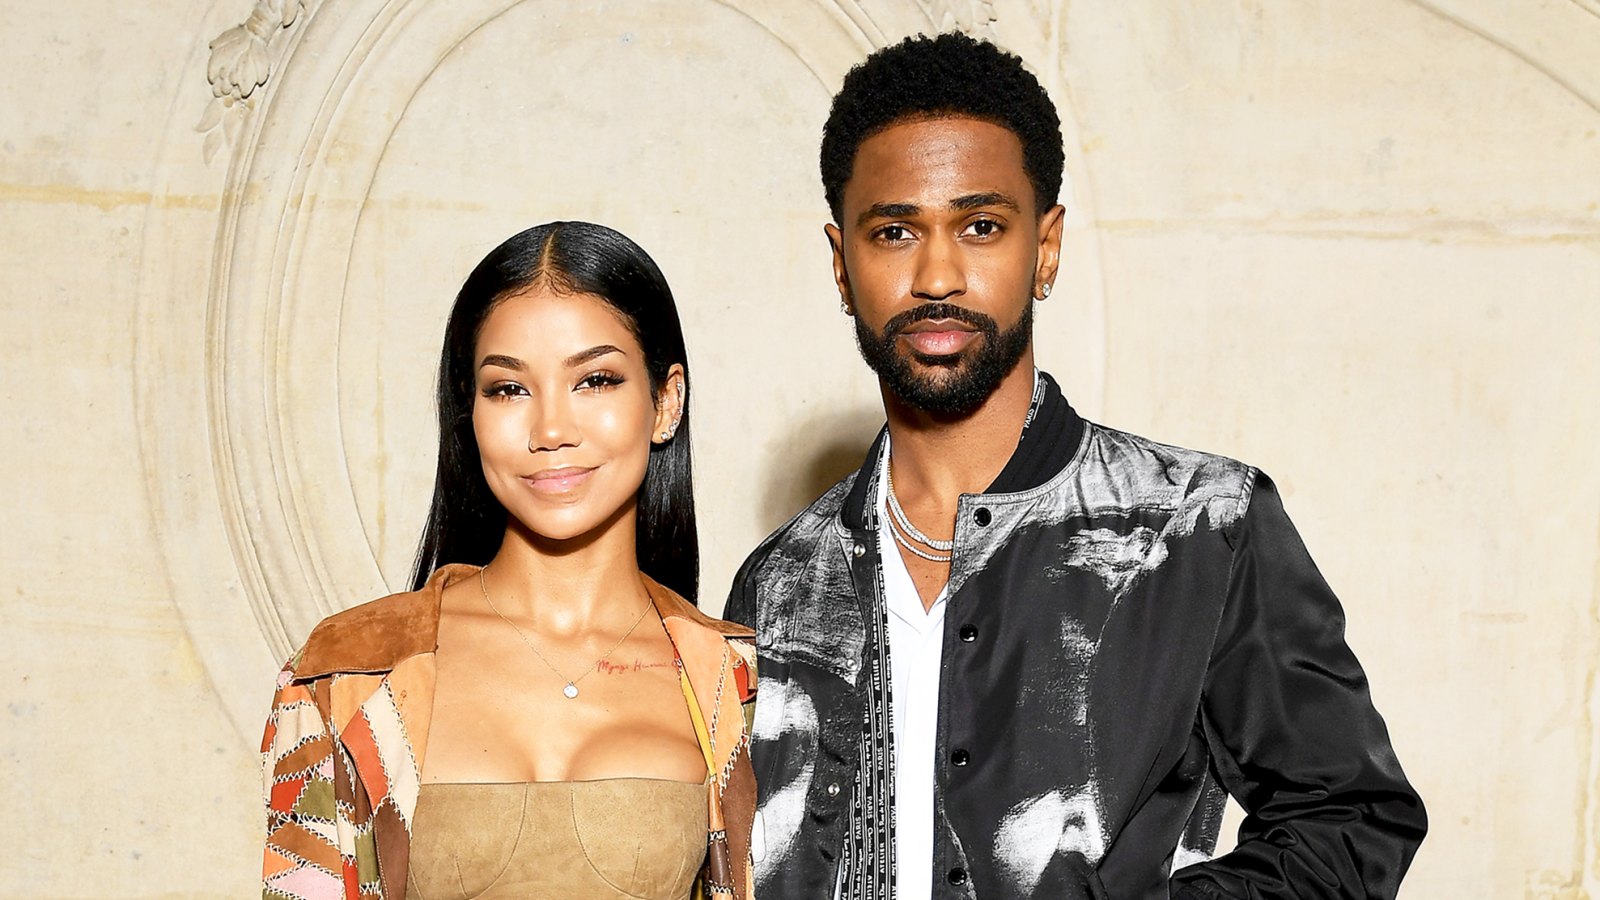 Jhene Aiko and Big Sean attend the Christian Dior Haute Couture Spring Summer 2018 show as part of Paris Fashion Week in Paris, France.